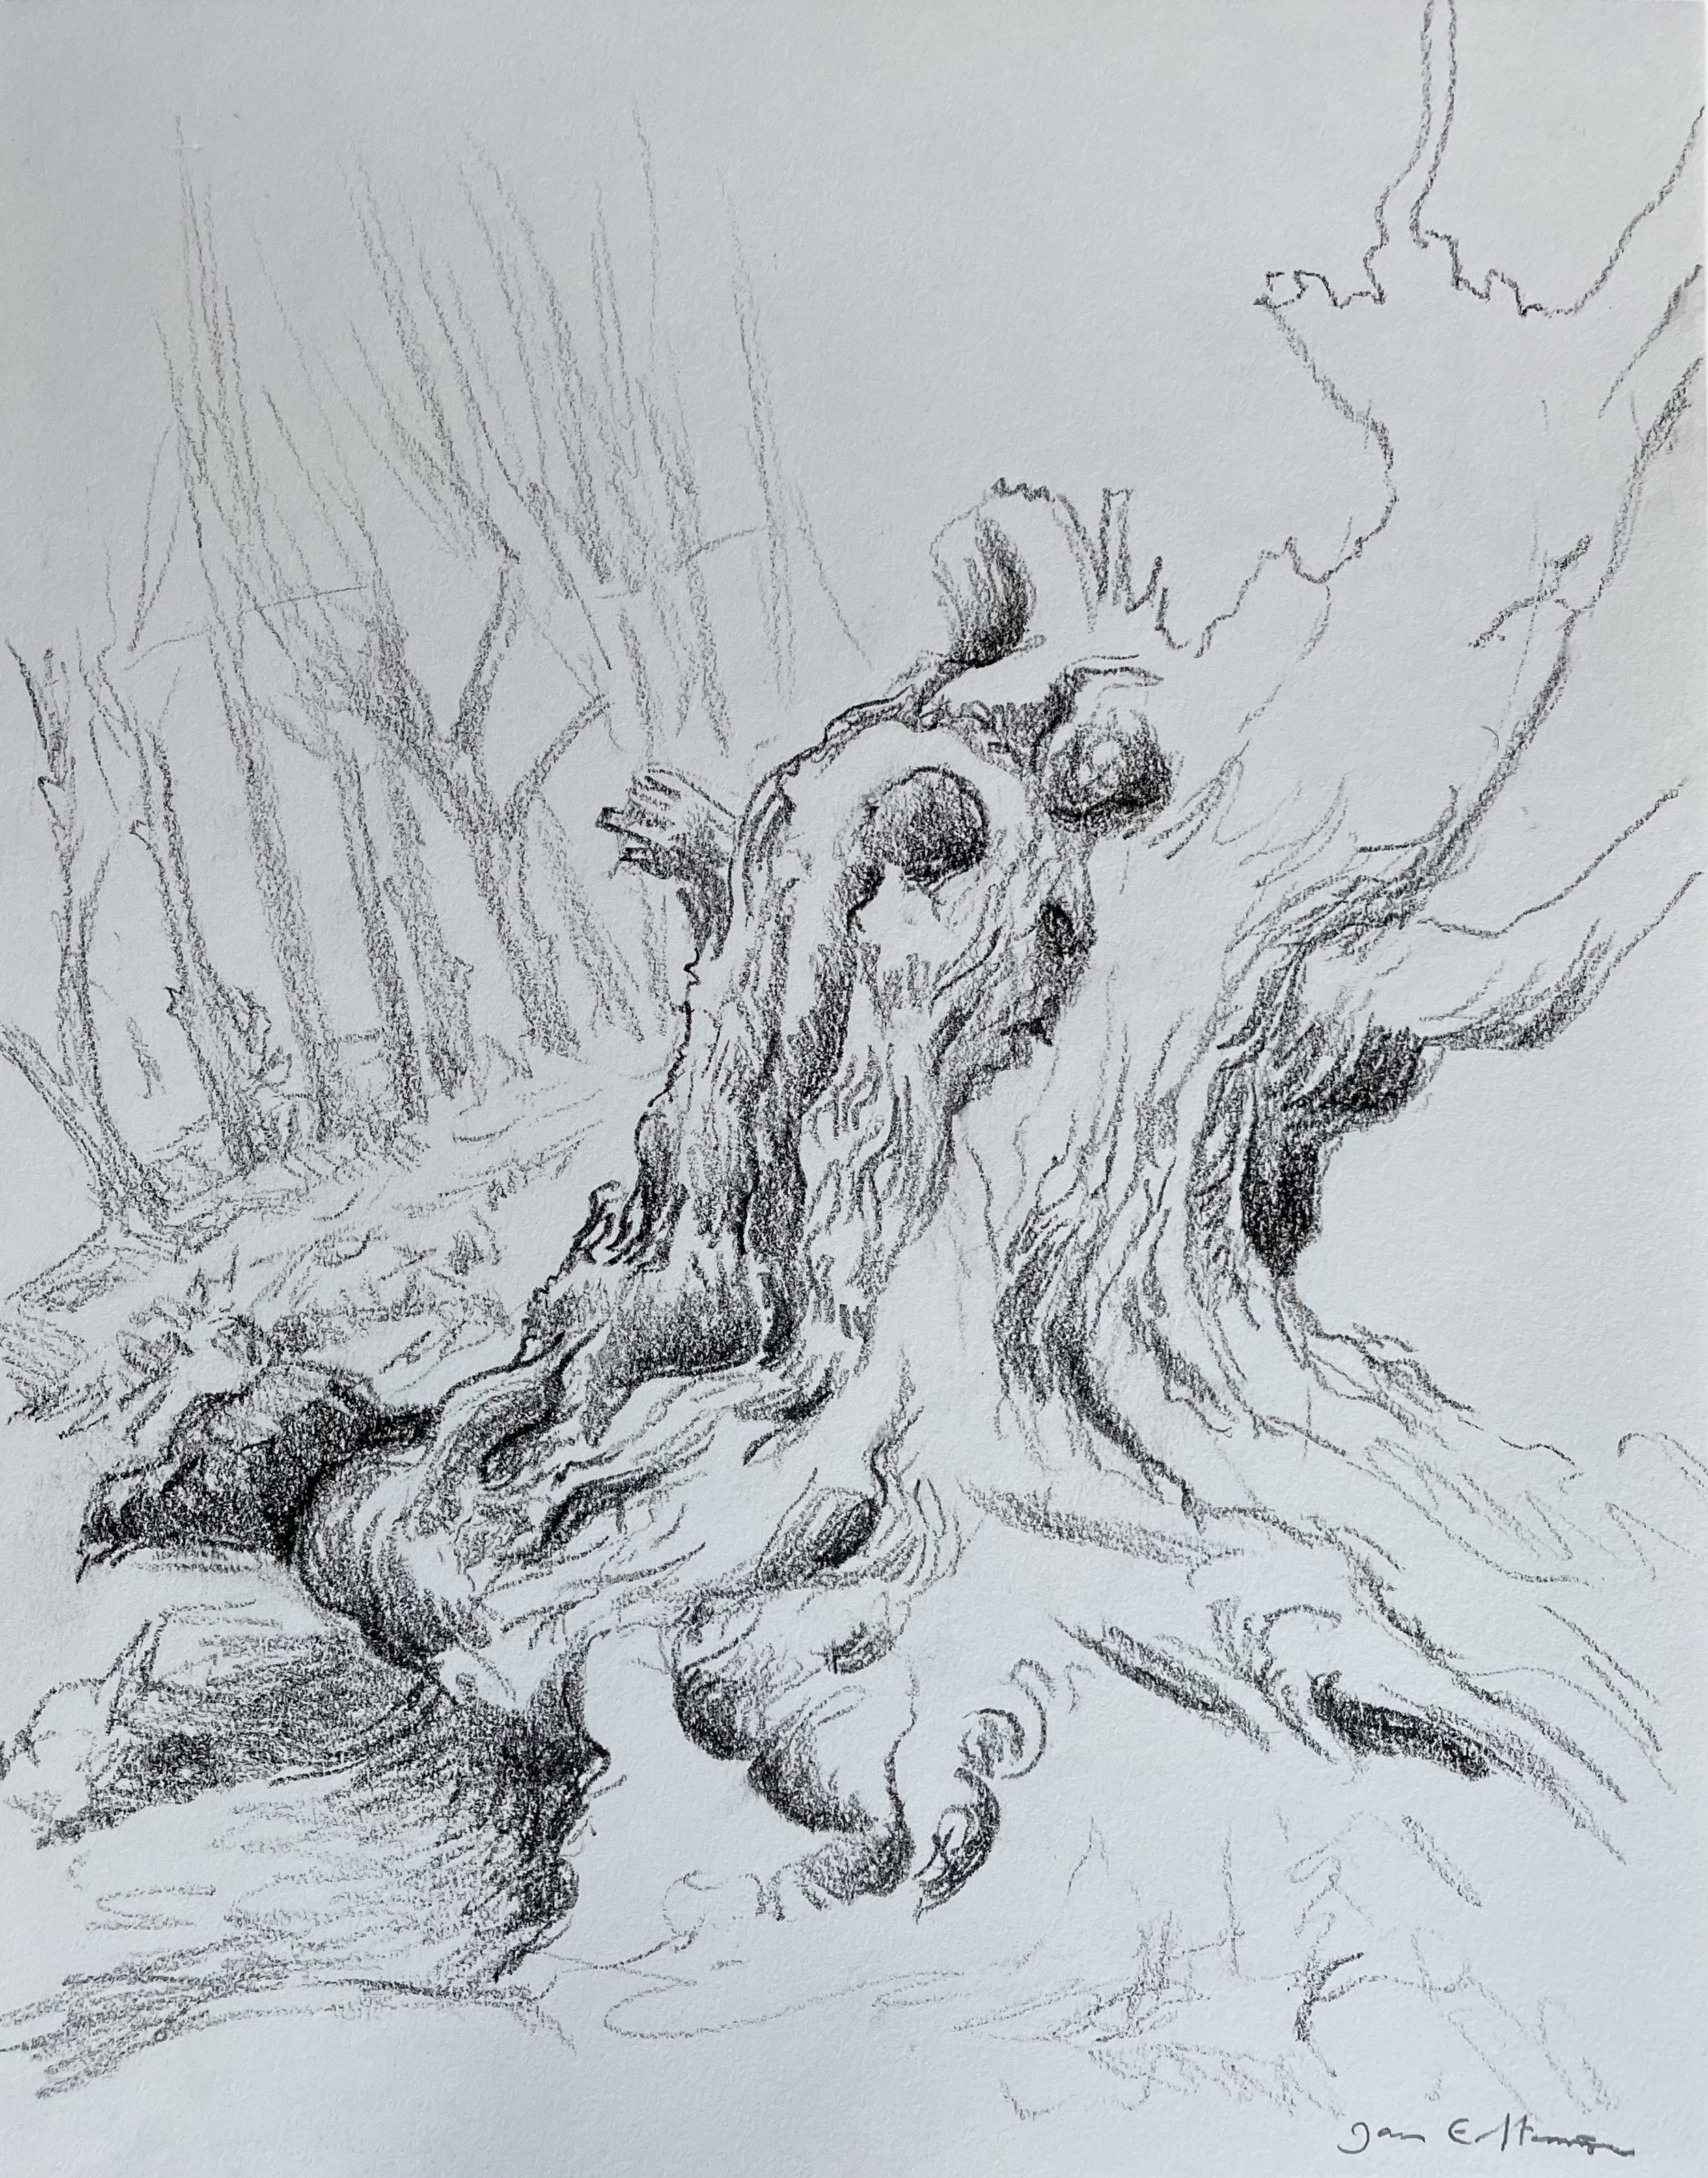 Old tree (Lithographic crayon on paper, 30 x 40 cm).